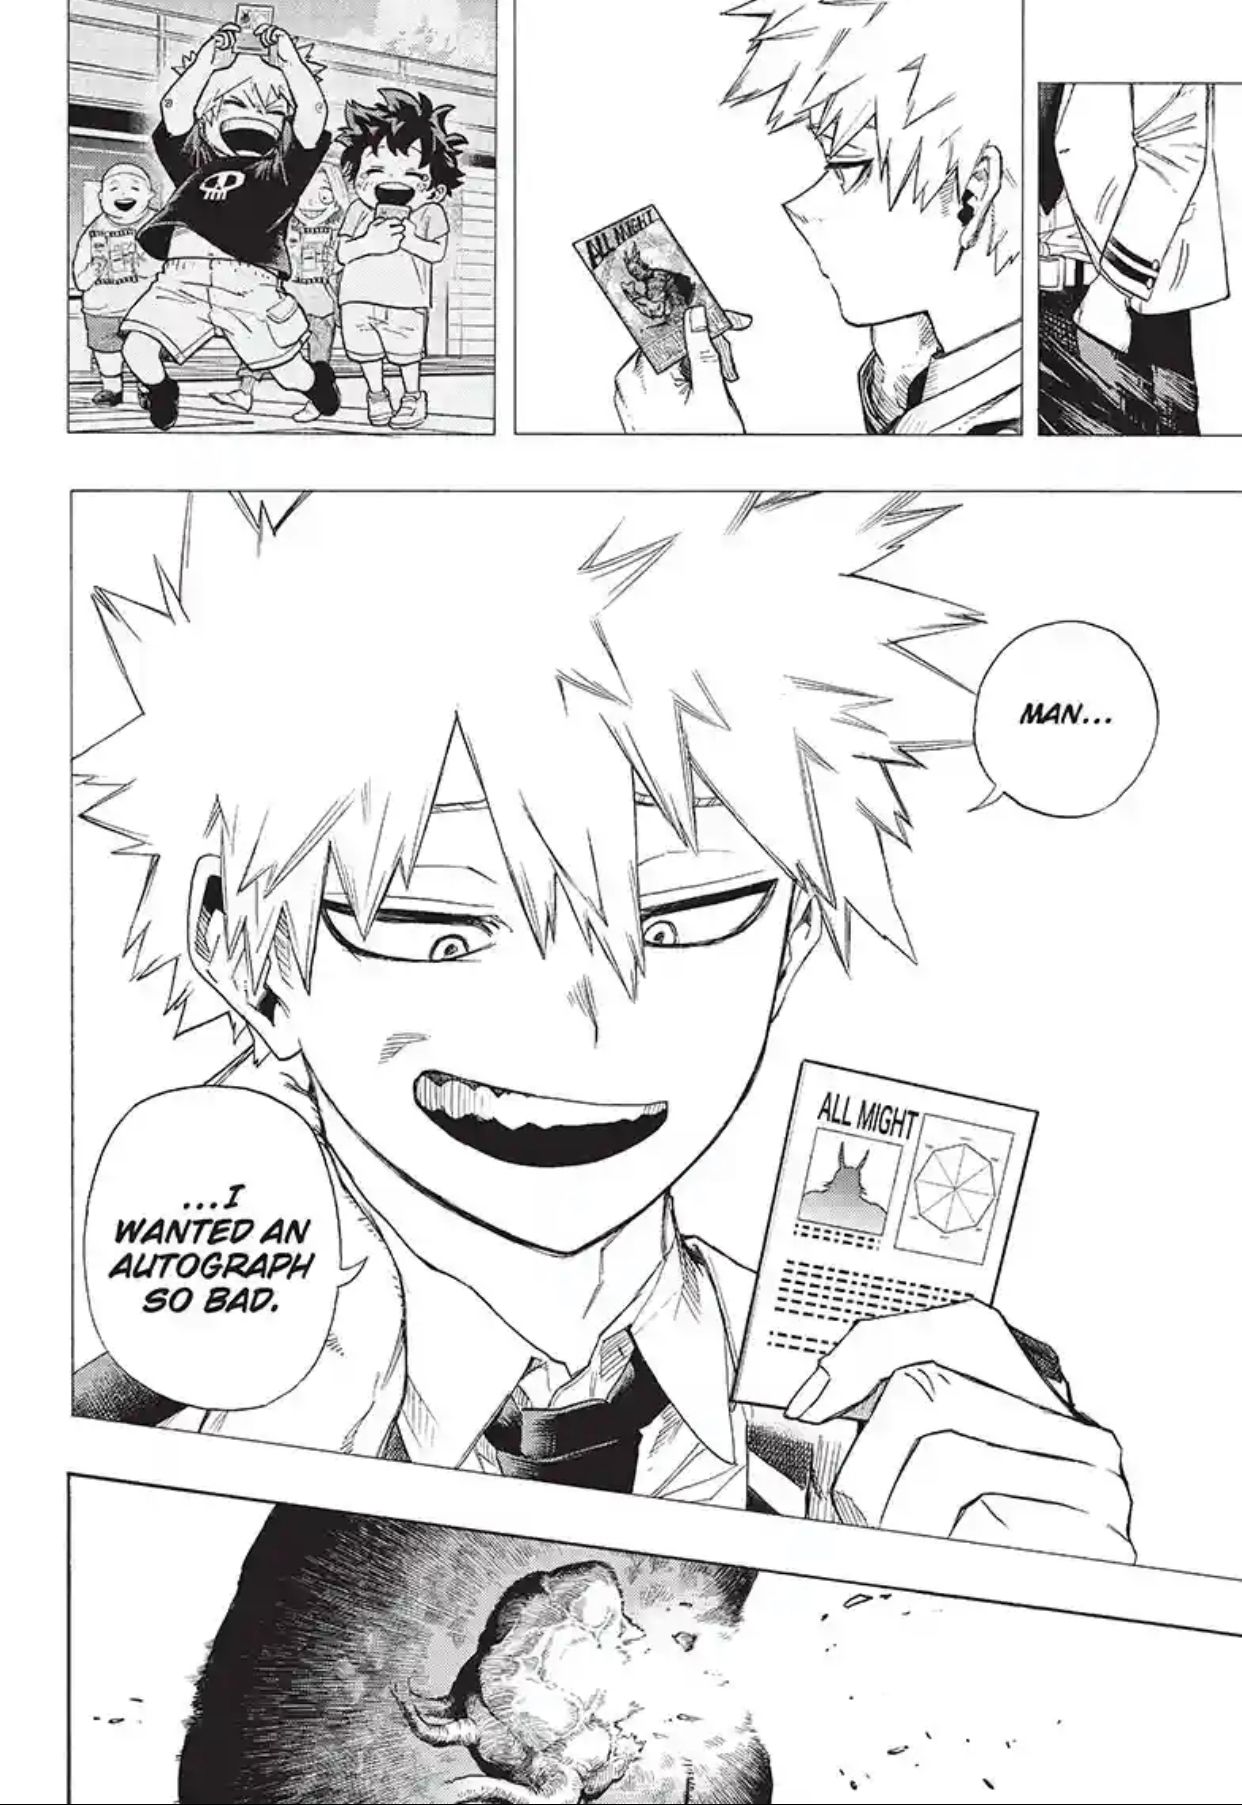 Bakugo wishing All Might signed his trading card before his death.